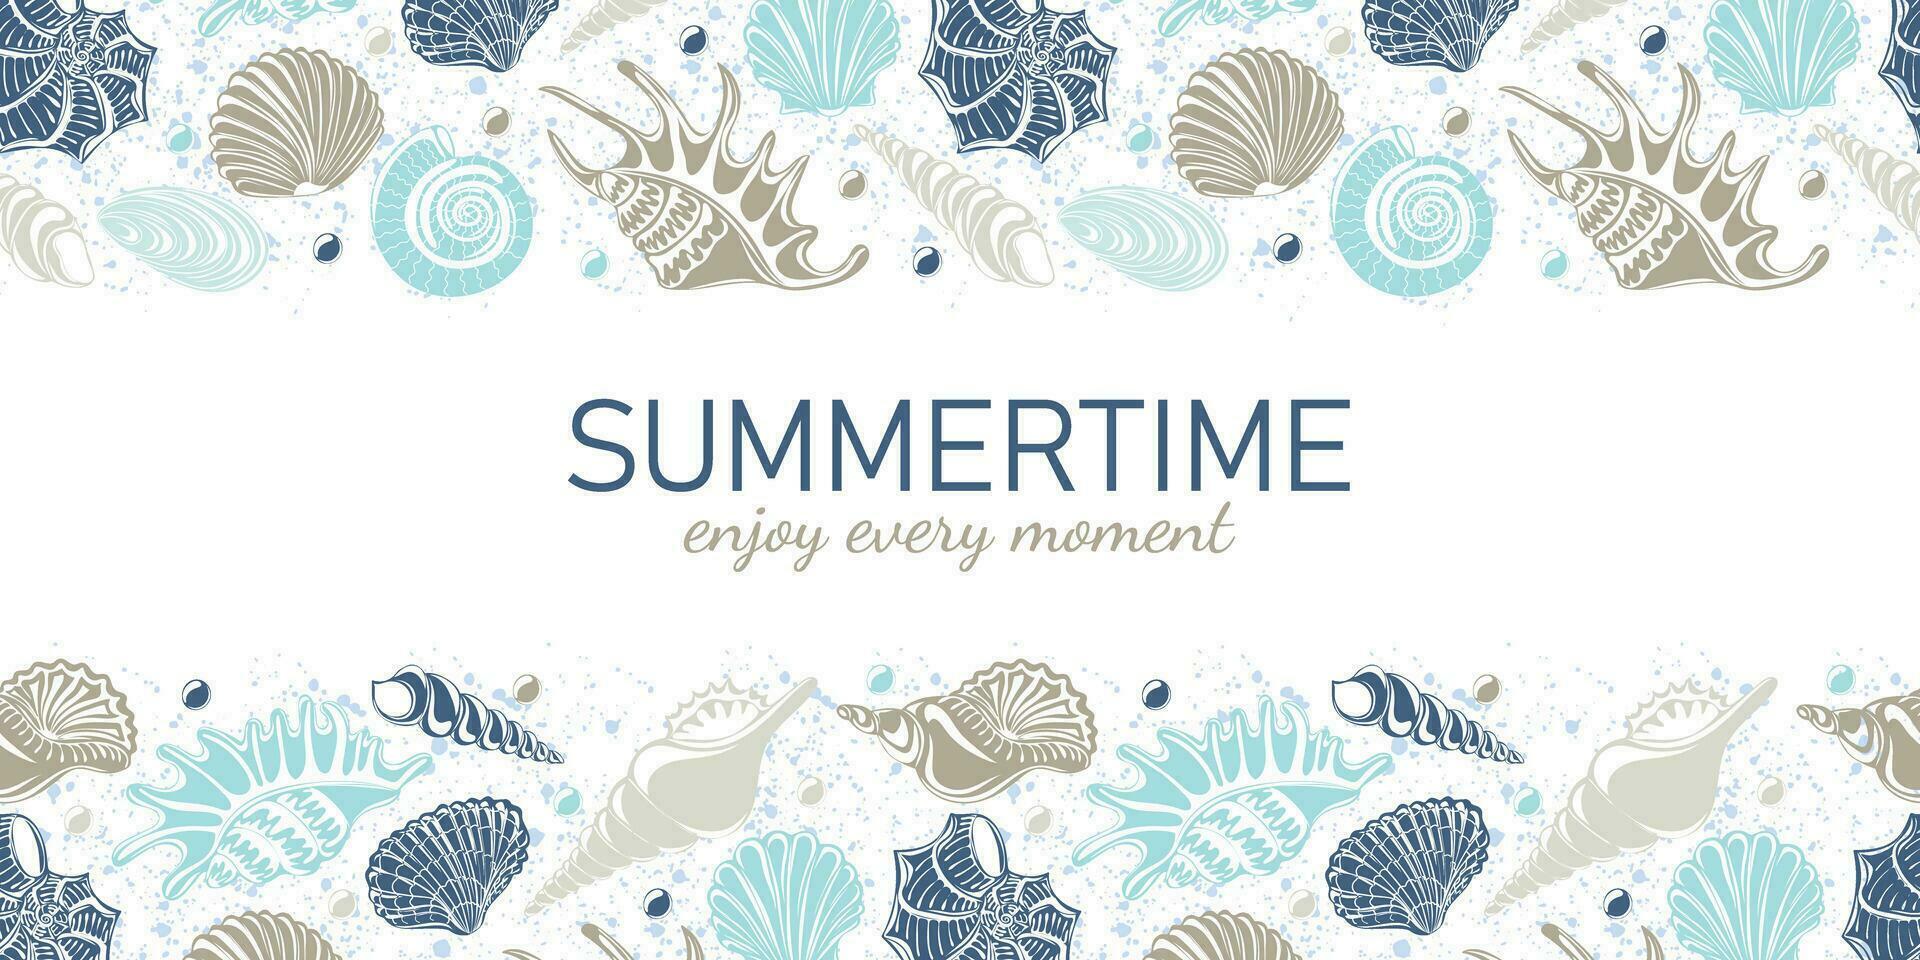 Summertime, enjoy every moment. Seamless horizontal border with colorful seashells on a white background vector